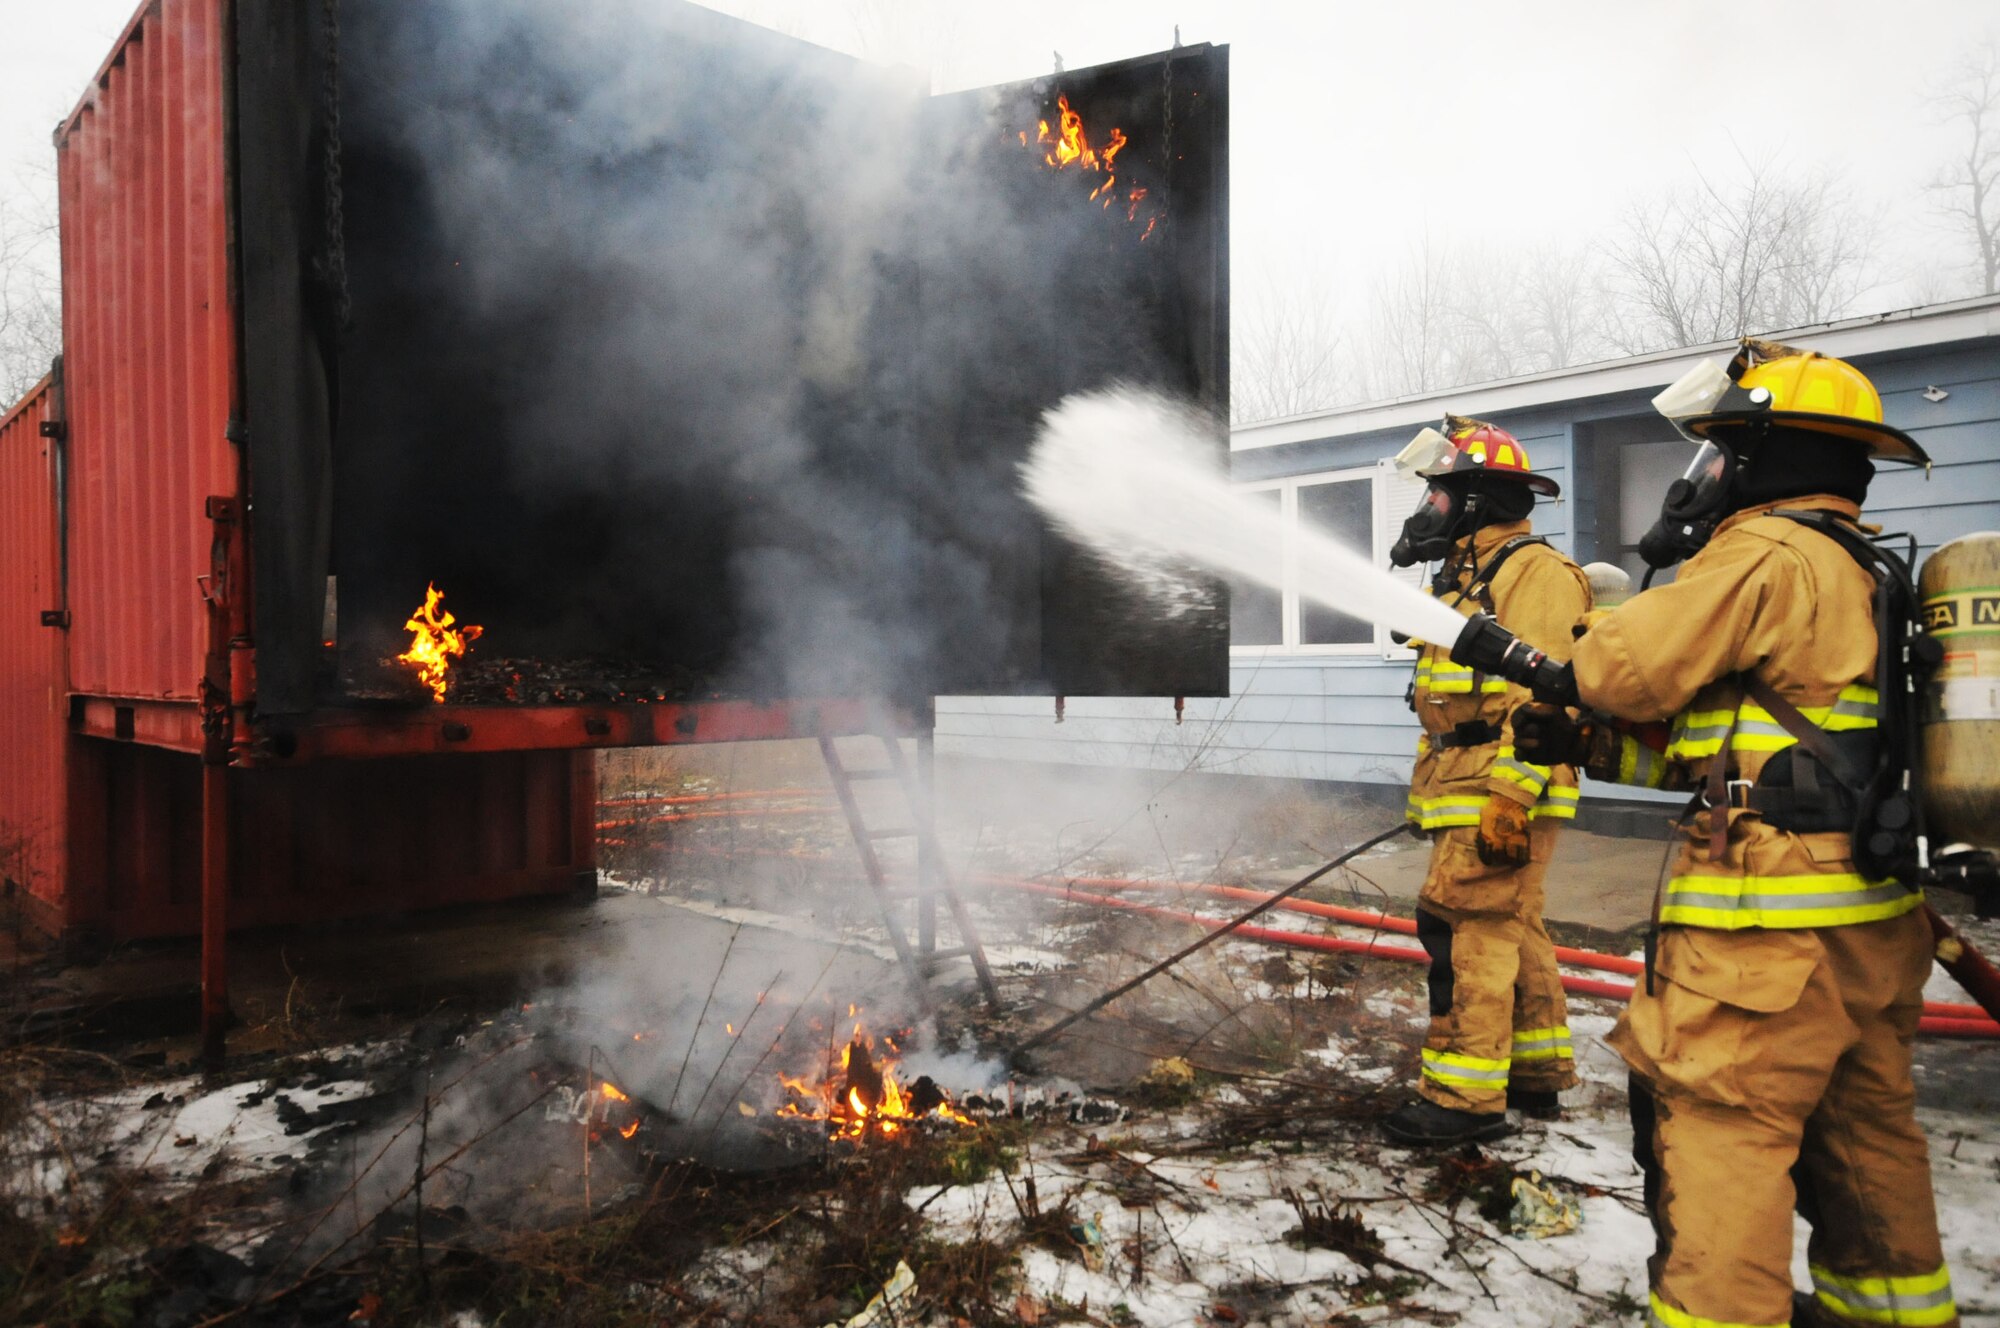 110th Attack Wing, Civil Engineering Squadron, Firefighters conduct Flashover training Saturday, January, 9, 2016, Thornapple Township Fire Station, Middleville, Mich.  In total fifteen firefighters participated in the flashover training, flashovers normally occur at 930 to 1100 degrees Fahrenheit, gases form at the ceiling of a structure, and suddenly ignite causing the entire ceiling to be on fire.  The 110th Fire Department is working closely with our local communities to increase hands on training and enrich our local partnerships.  (U.S. Air Force photo by Tech. Sgt. Timothy Diephouse/released)